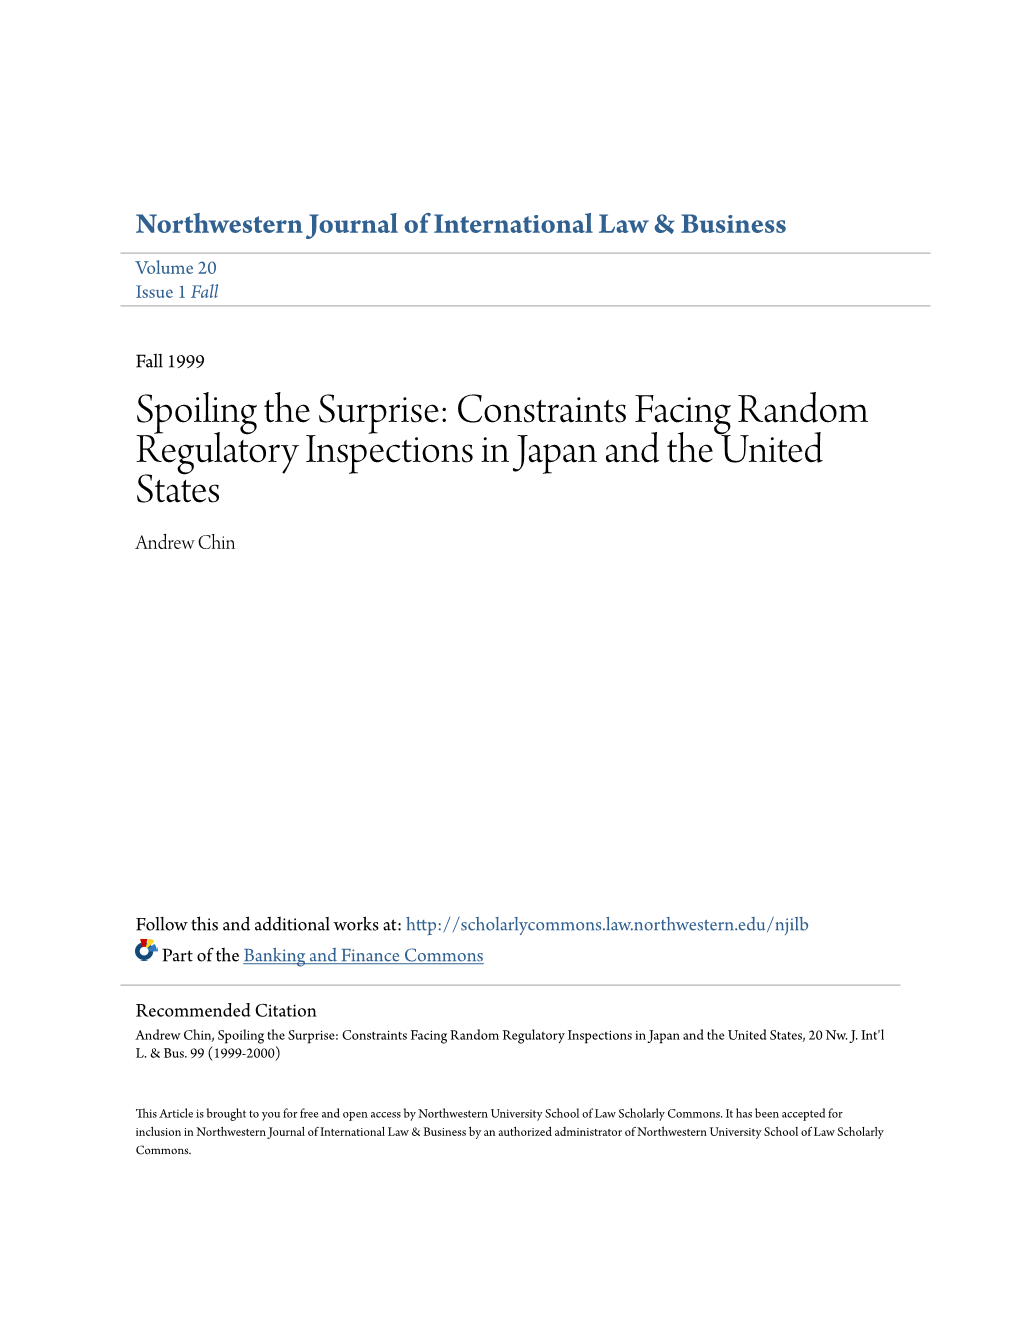 Constraints Facing Random Regulatory Inspections in Japan and the United States Andrew Chin